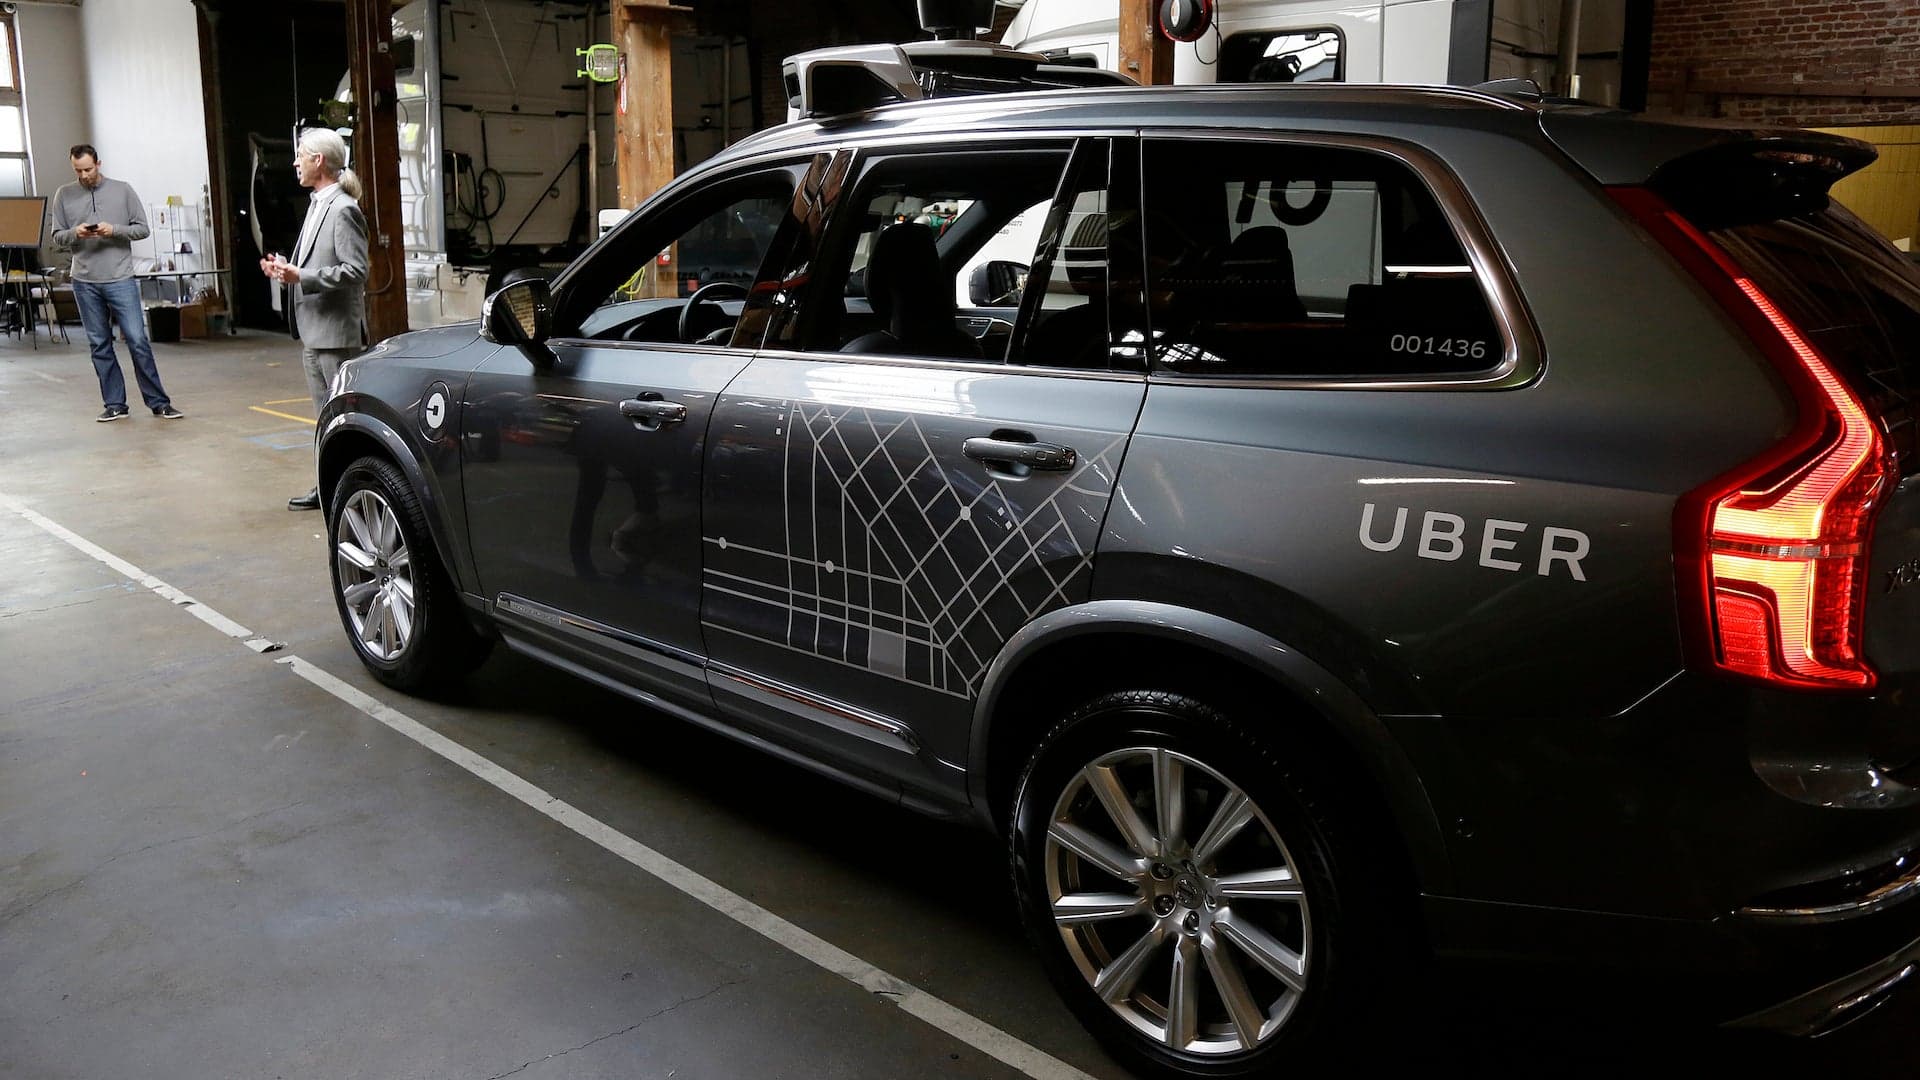 Uber Says Its Self-Driving Cars Have a “Problem” With Bike Lanes